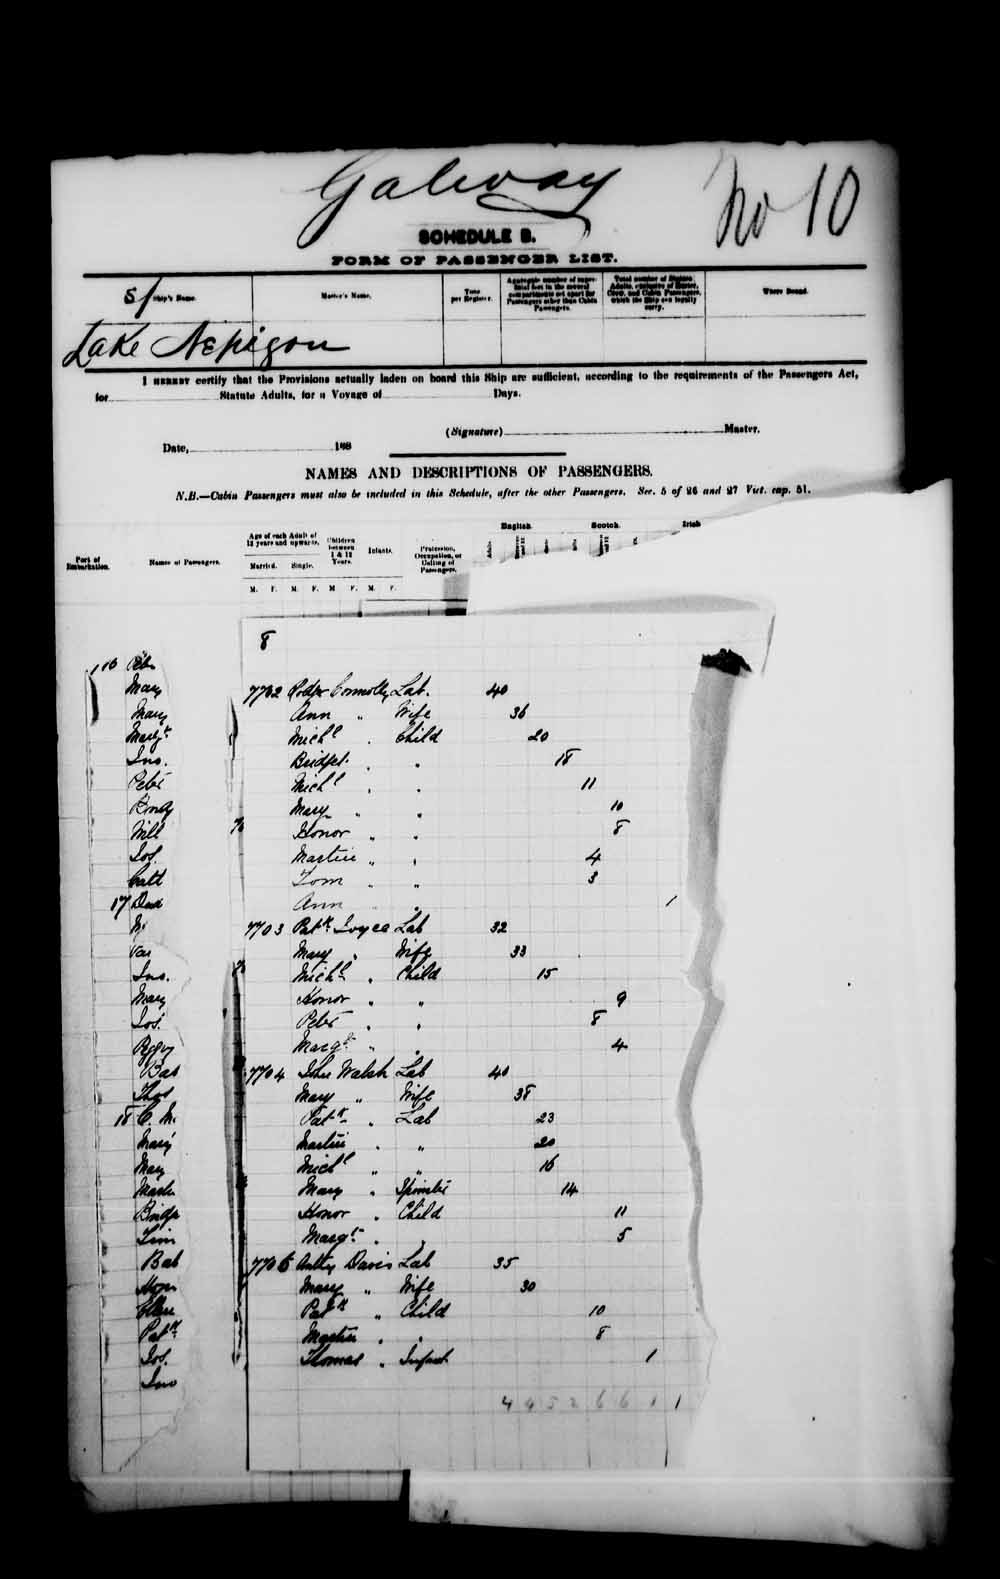 Digitized page of Passenger Lists for Image No.: e003541464